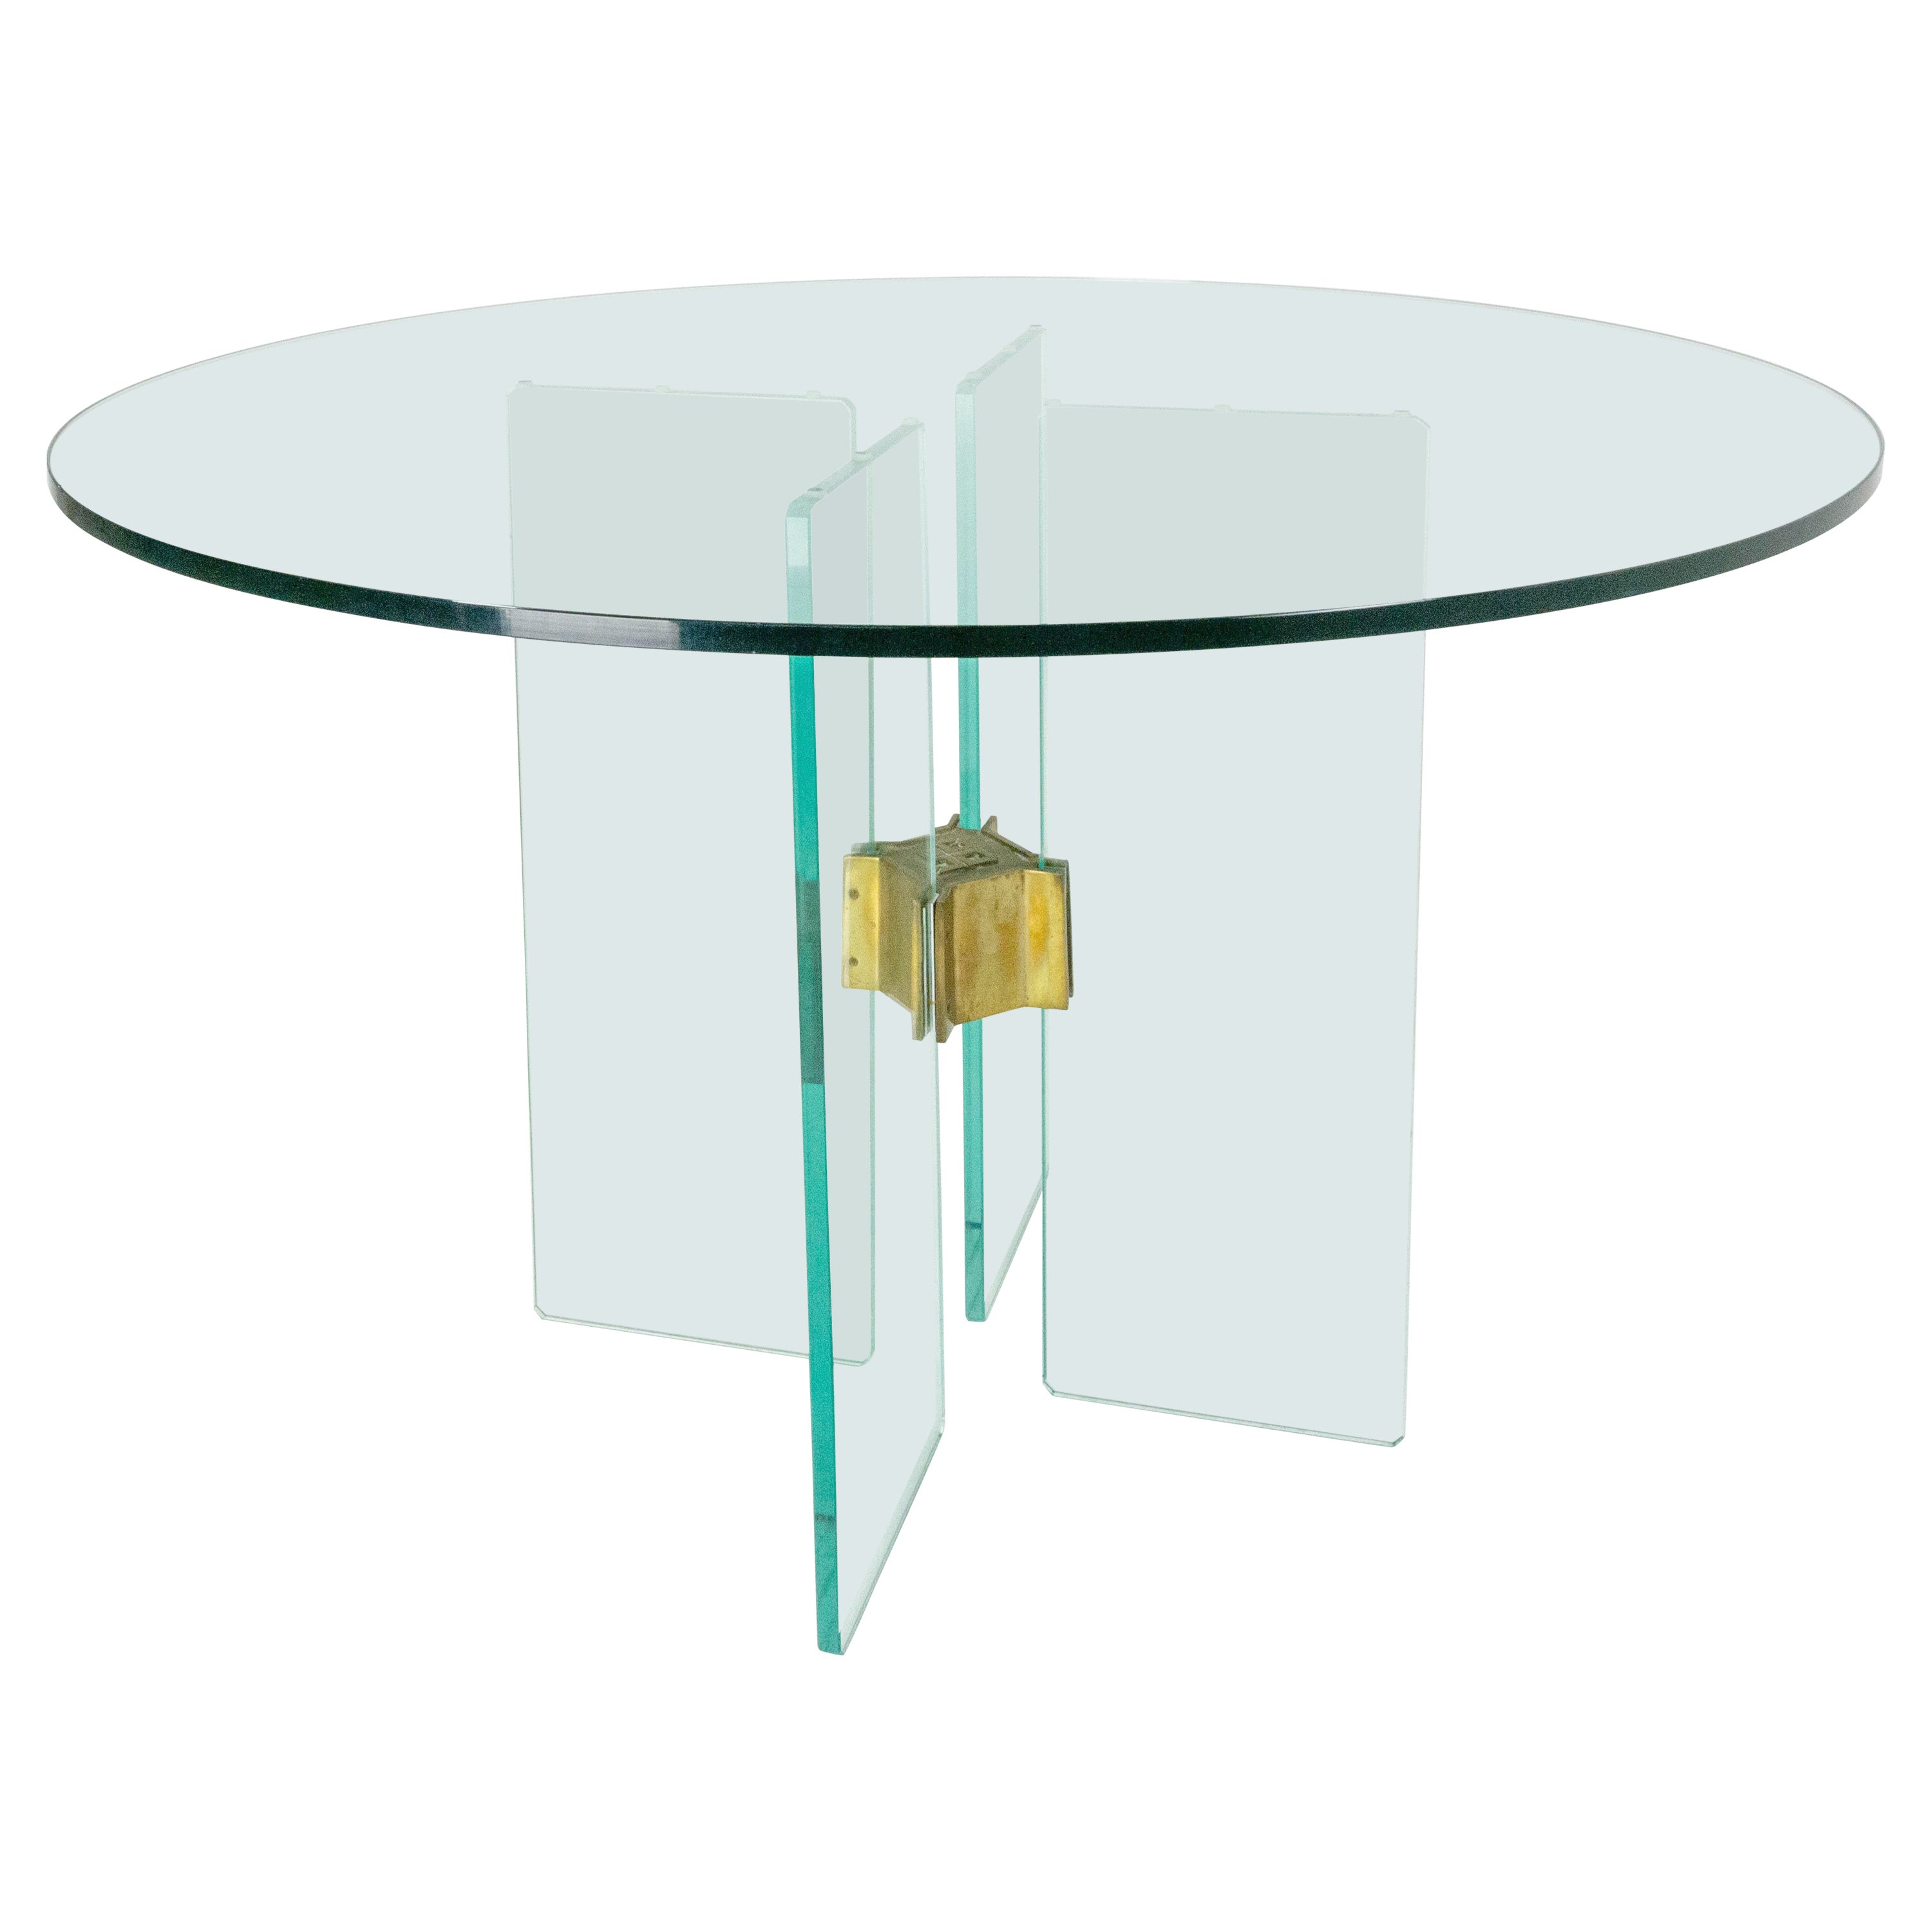 Italian Round Dining Table Glass and Brass, circa 1970